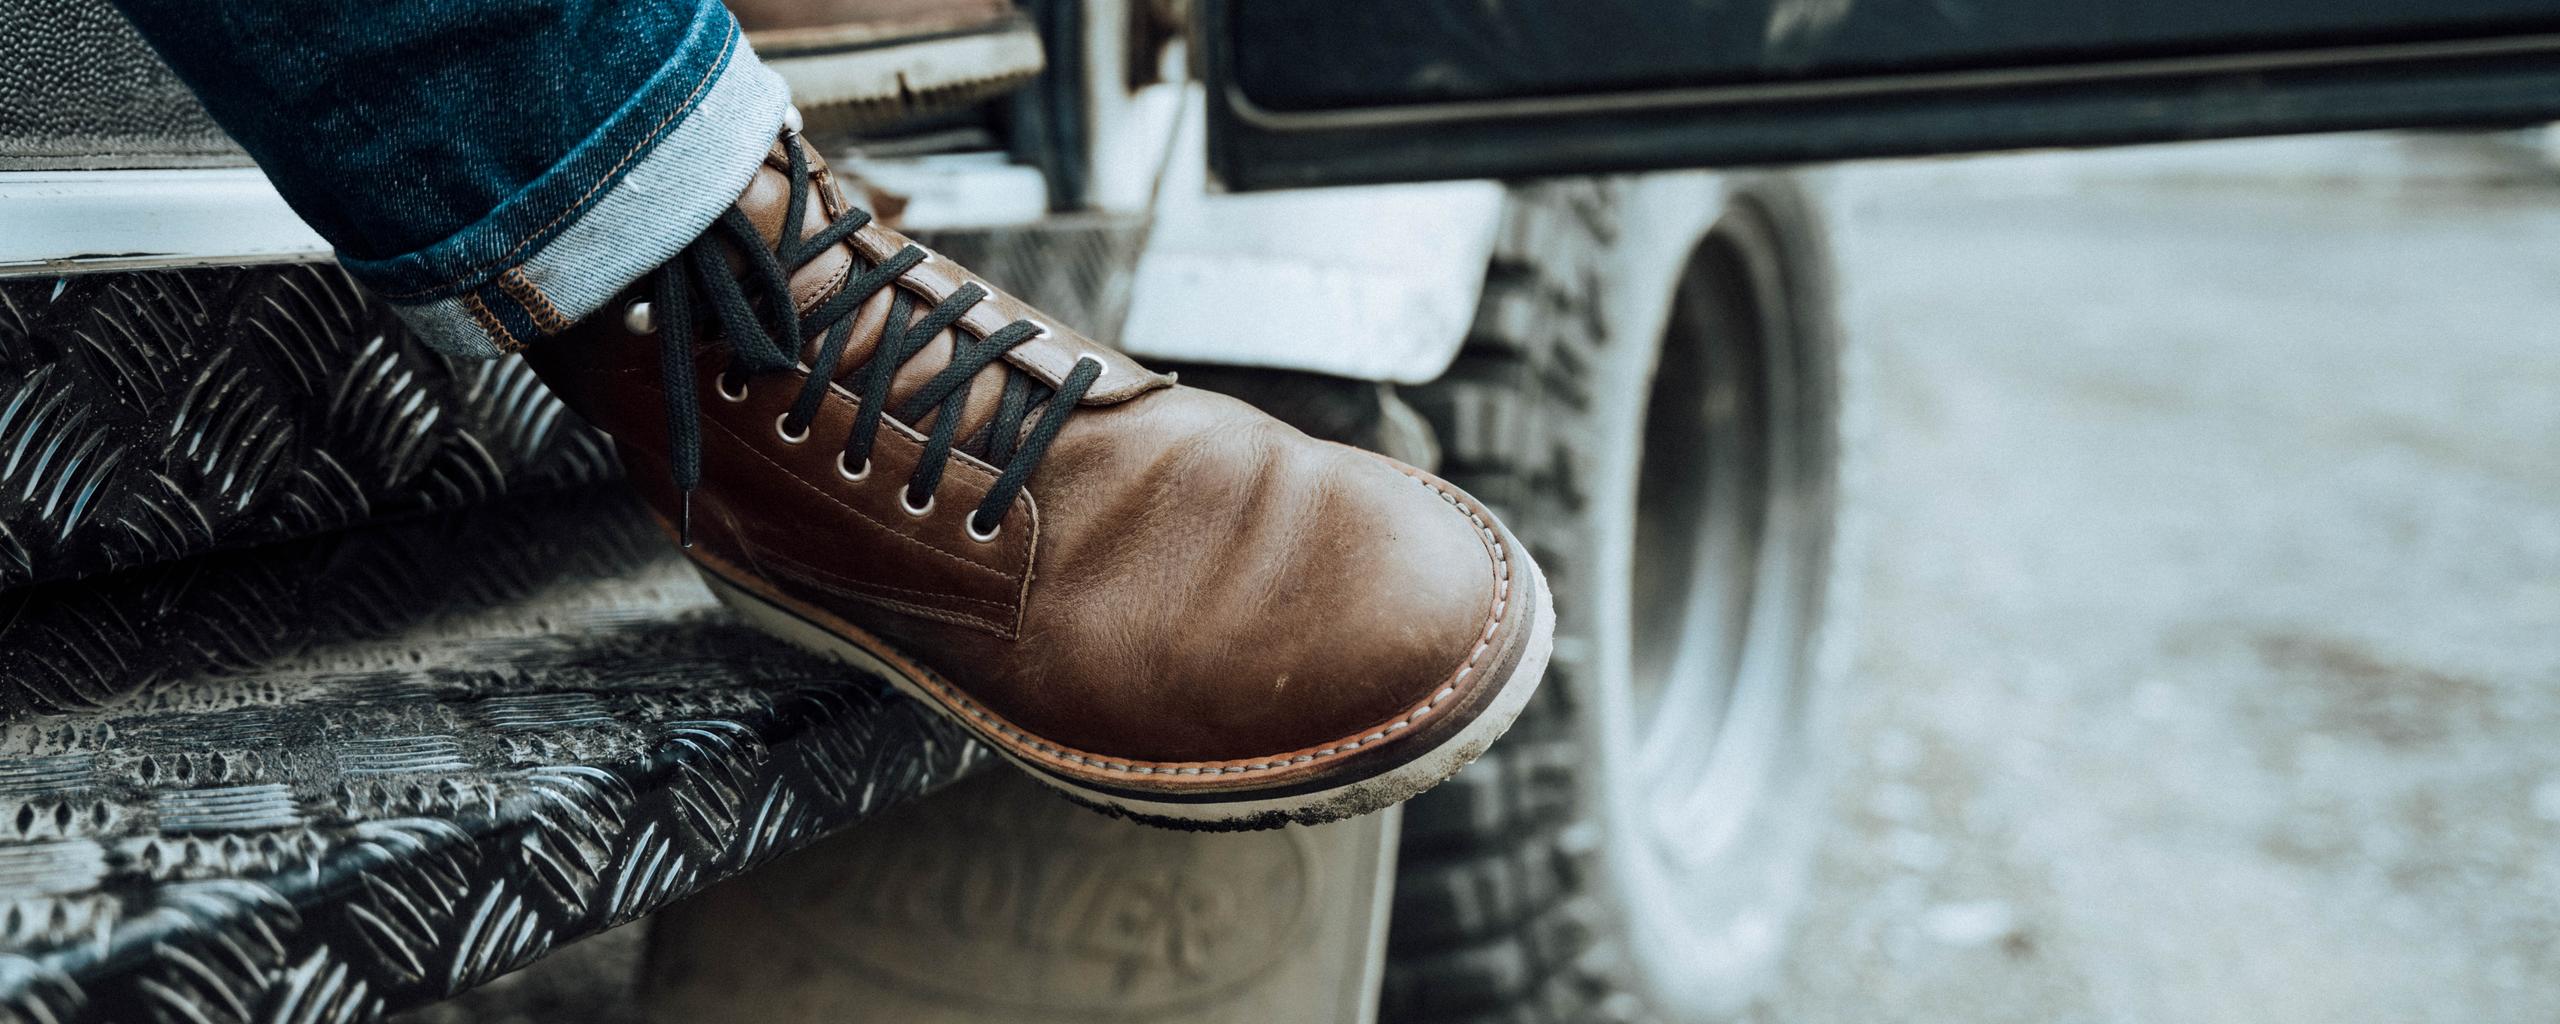 Closeup of man's shoes stepping out of truck